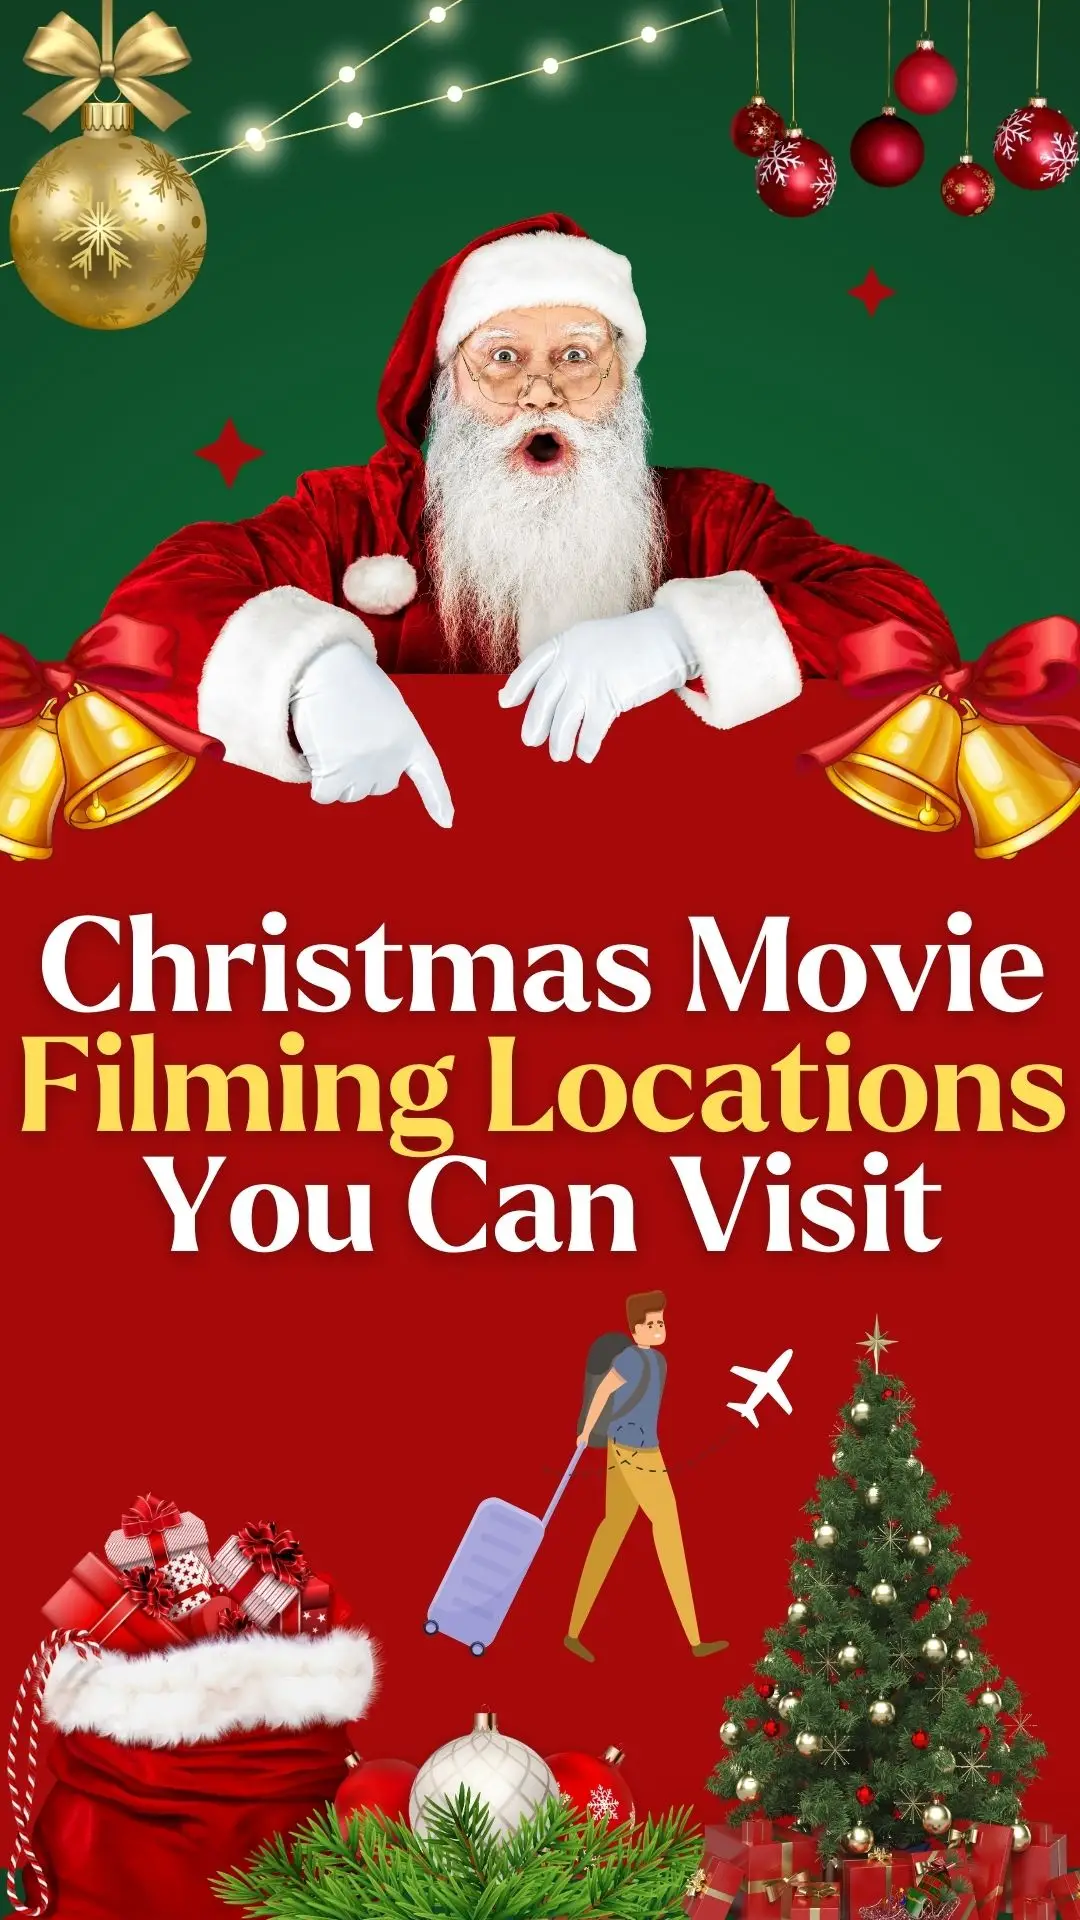 Christmas Movie Filming Locations You Can Visit